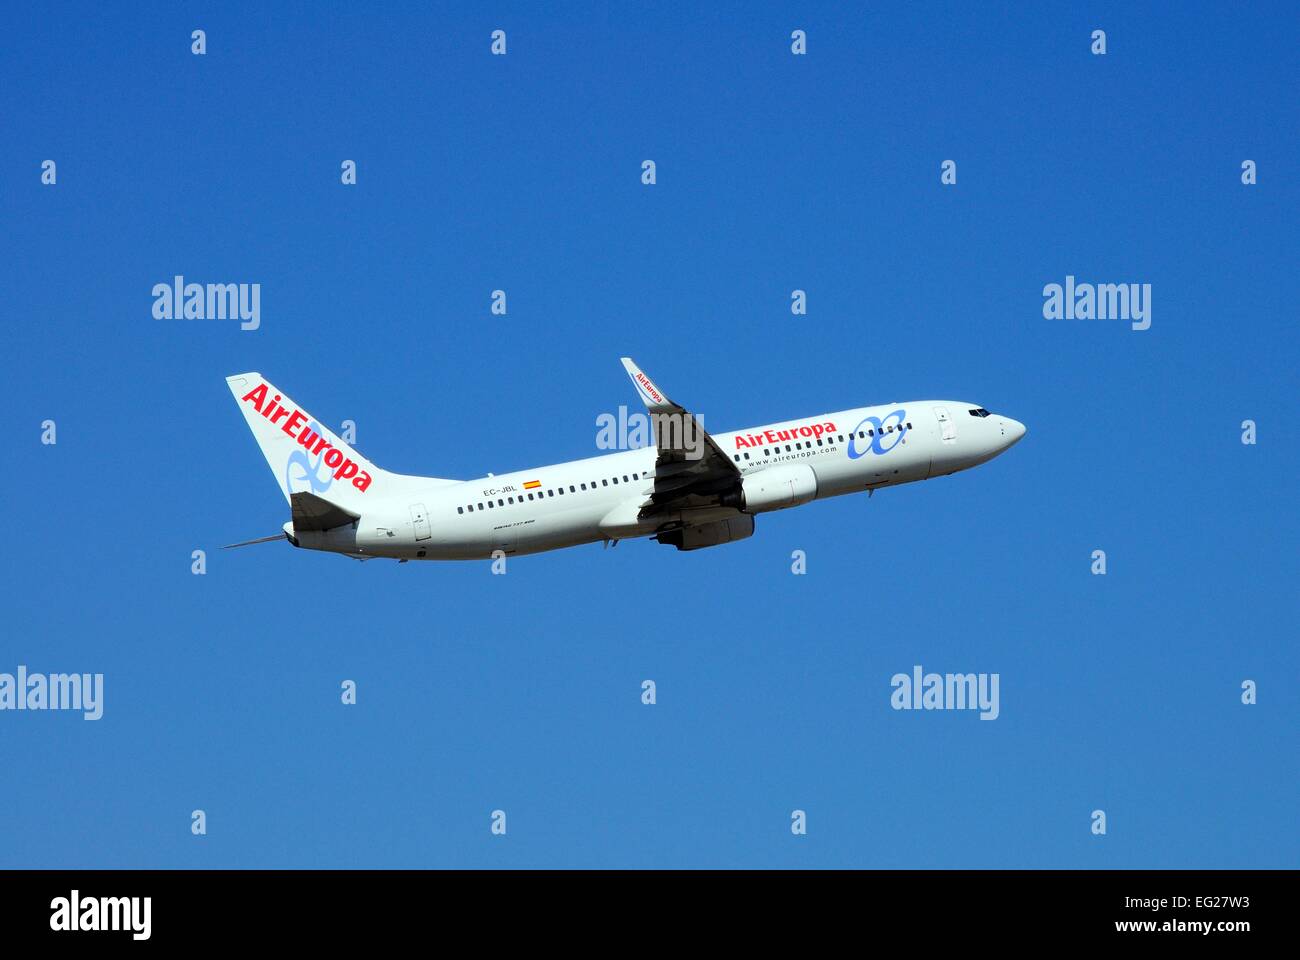 Air Europa Boeing 737-800 taking off against a blue sky Stock Photo